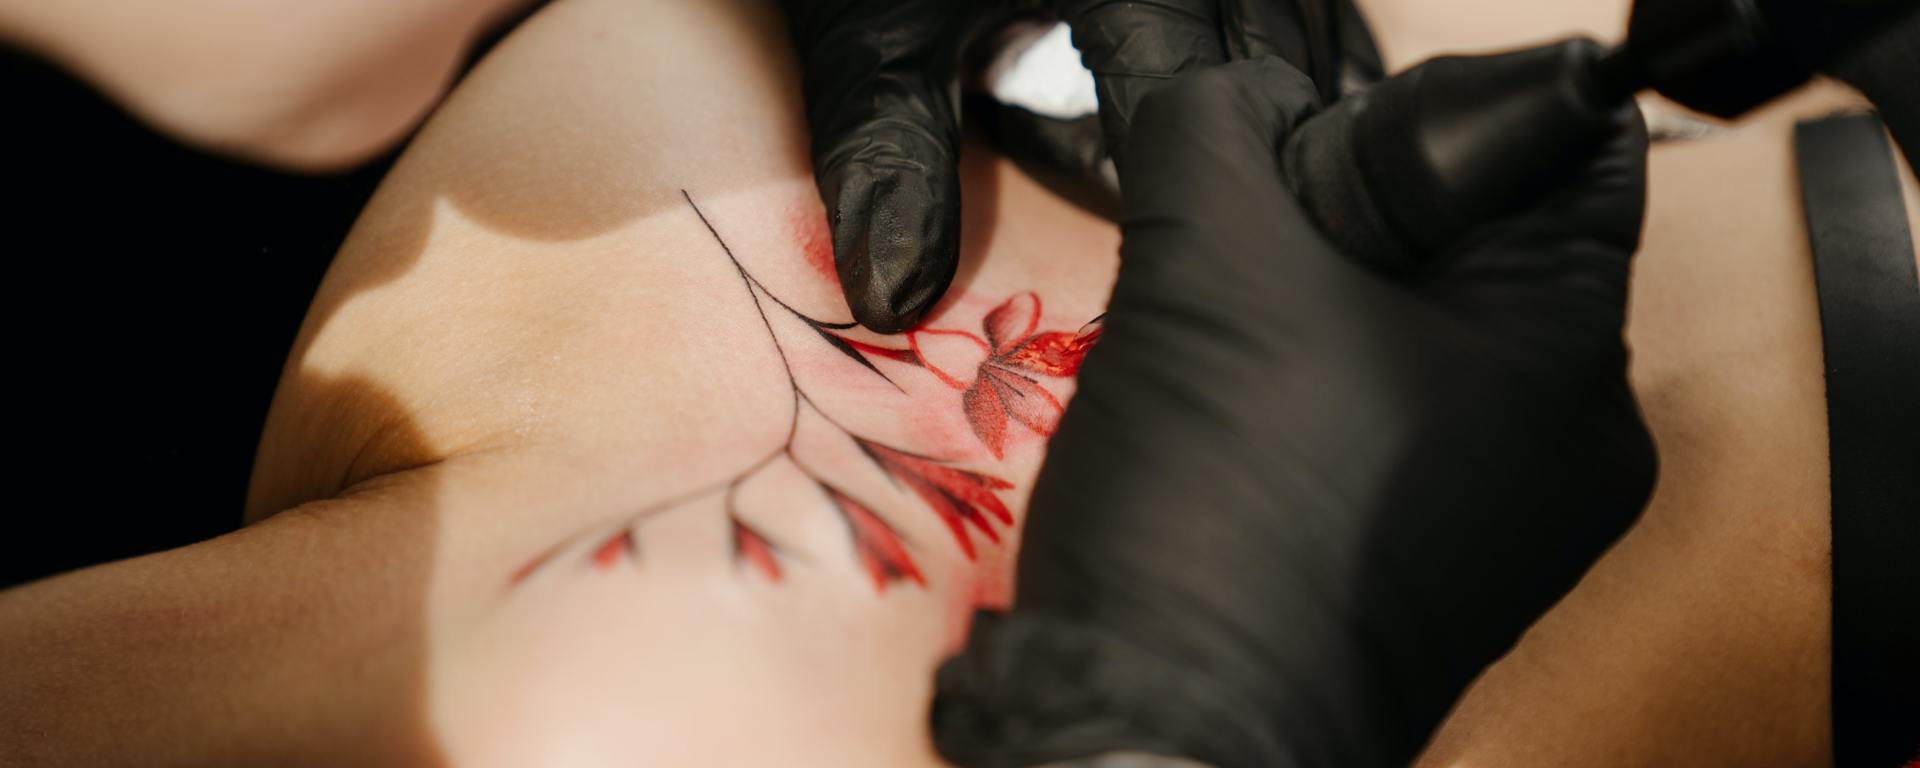 someone tattooing red flowers on another person